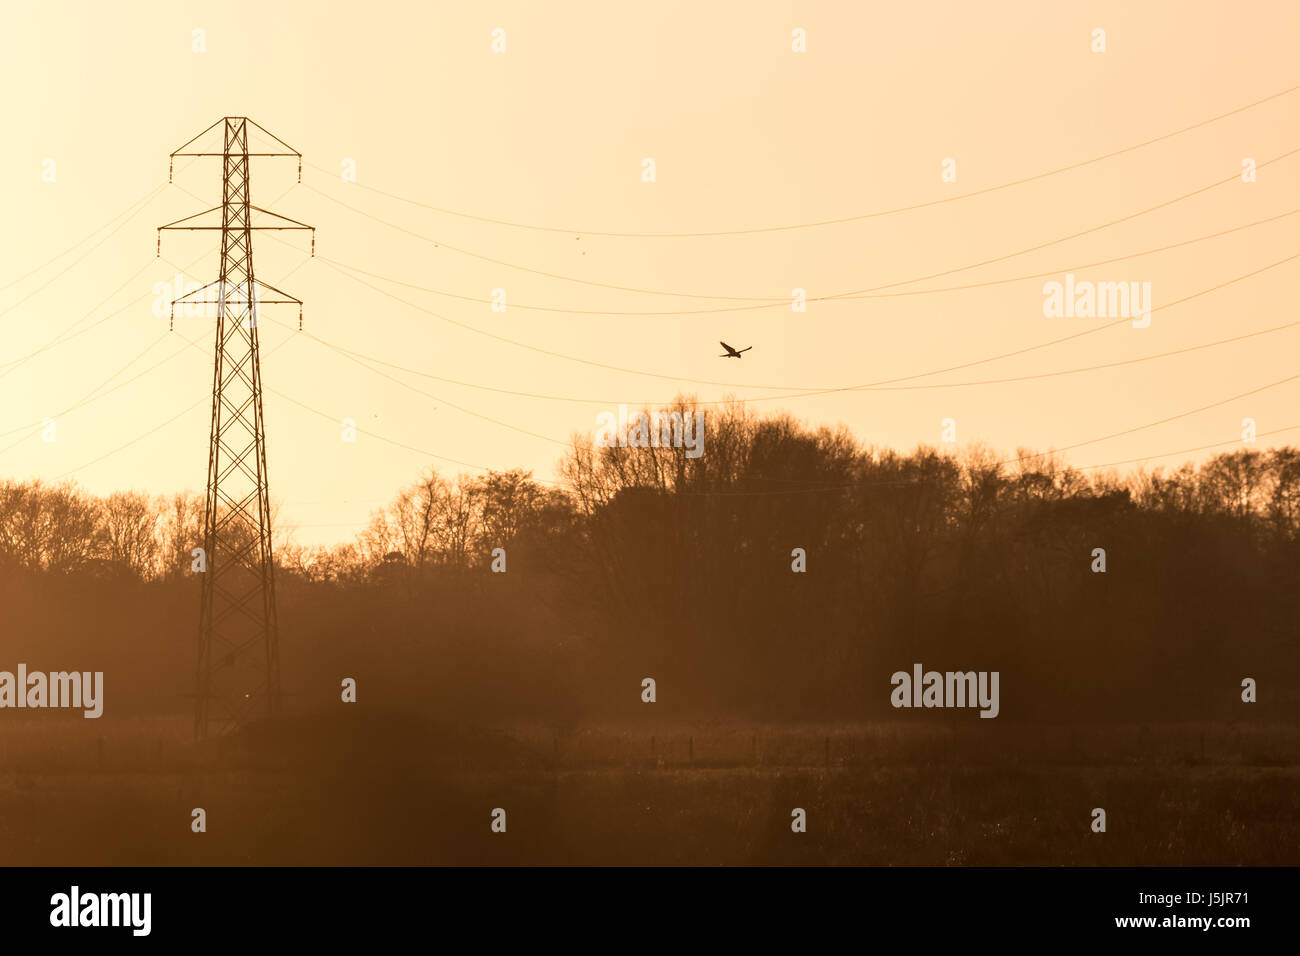 Silhouette of a Kestrel falcon raptor (Falco tinnunculus) hunting hovering over meadow at sunset with pylon and power wires or lines Stock Photo